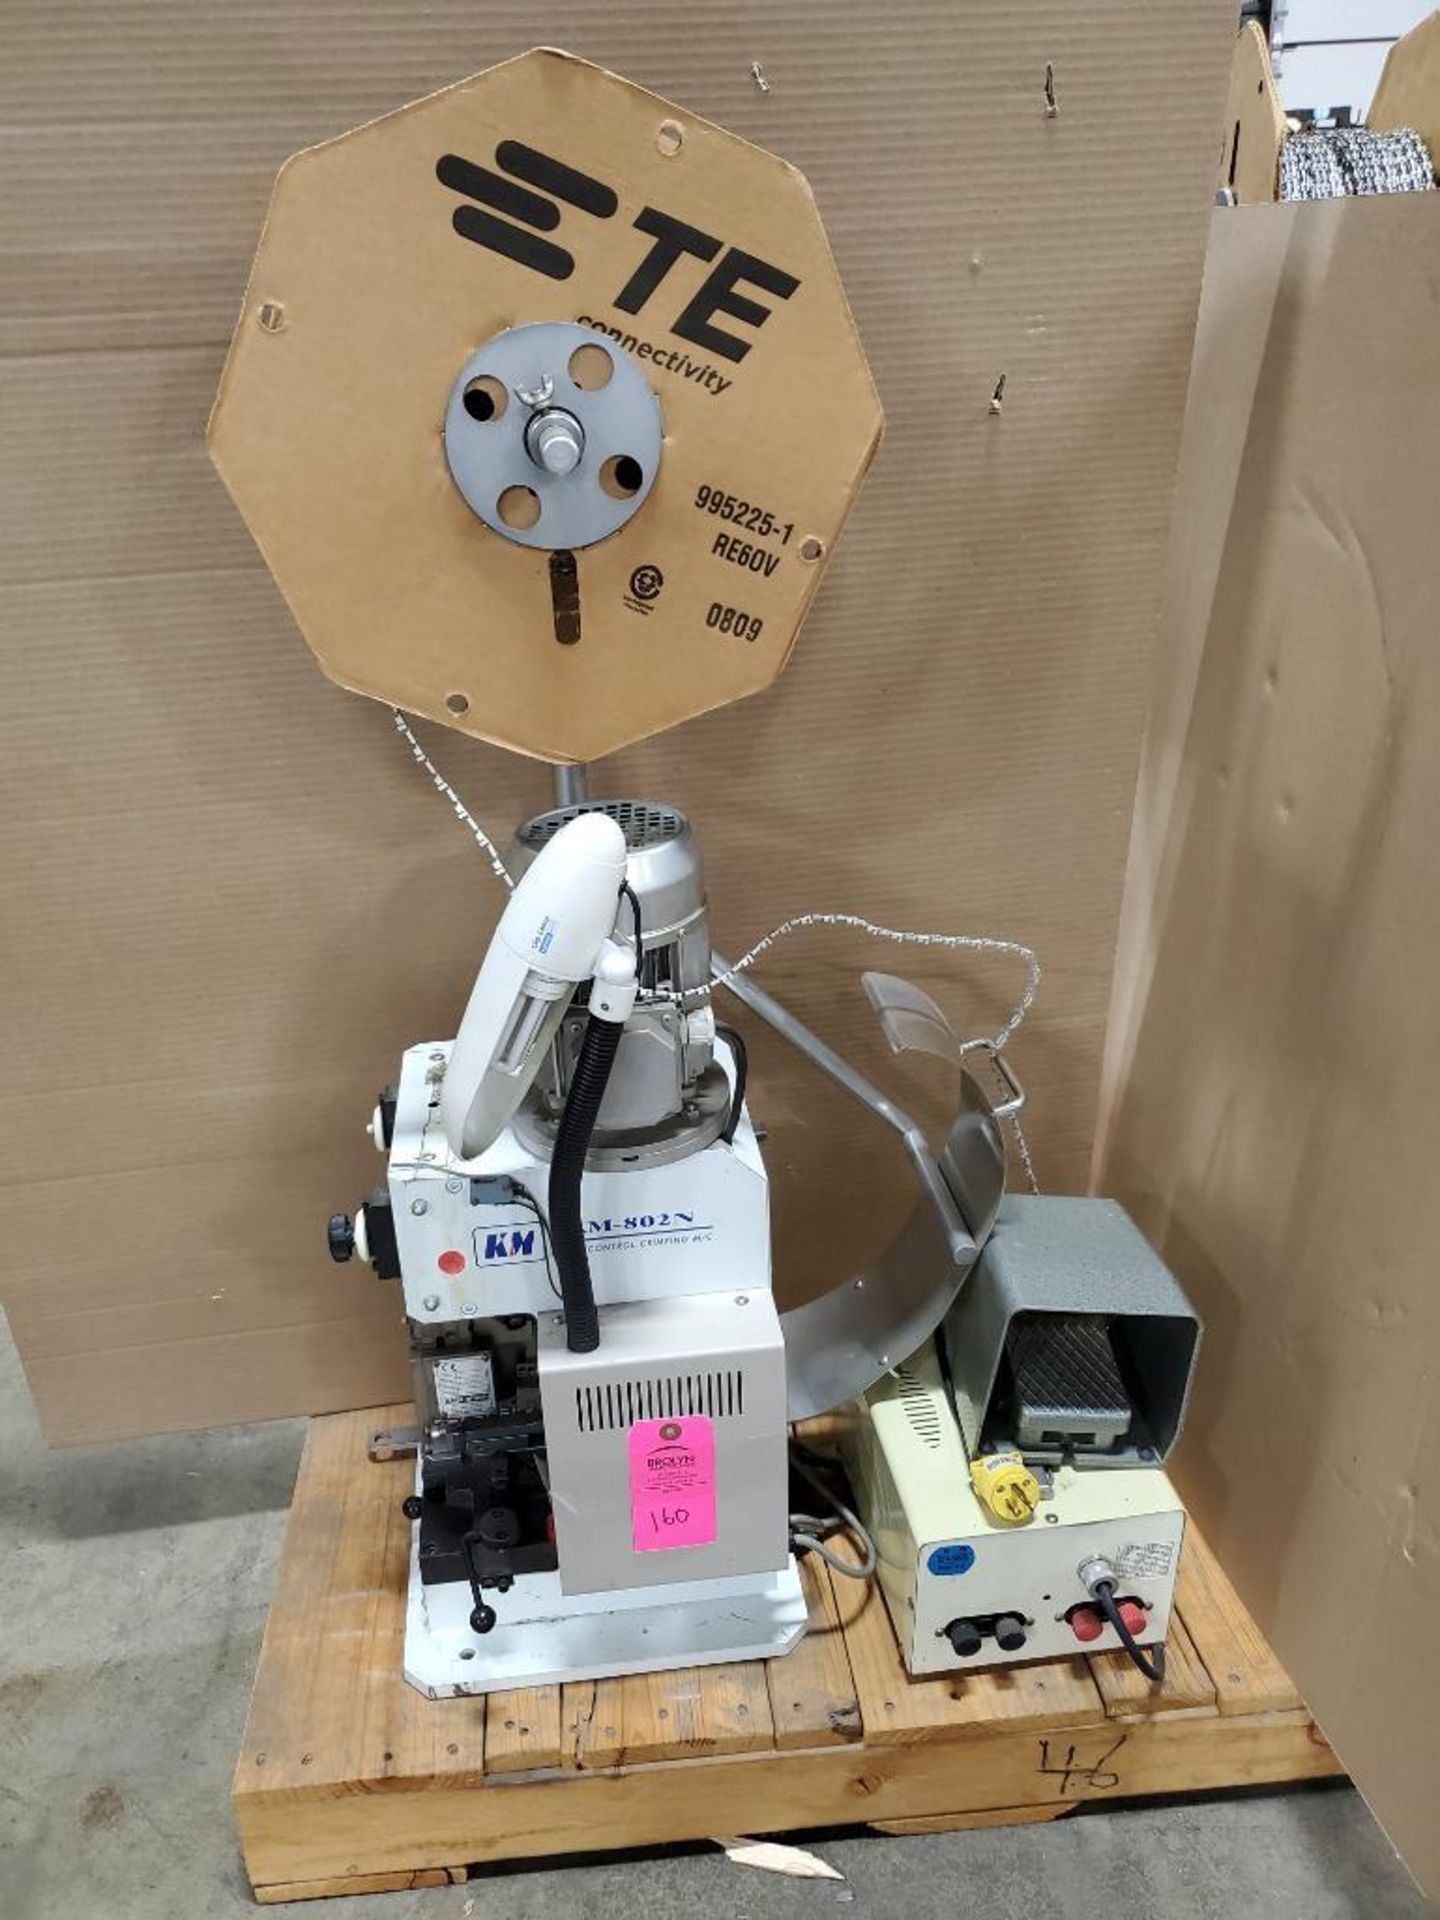 KM Digitech terminal crimping machine. Model KM-802N. Includes spade connector die as pictured.